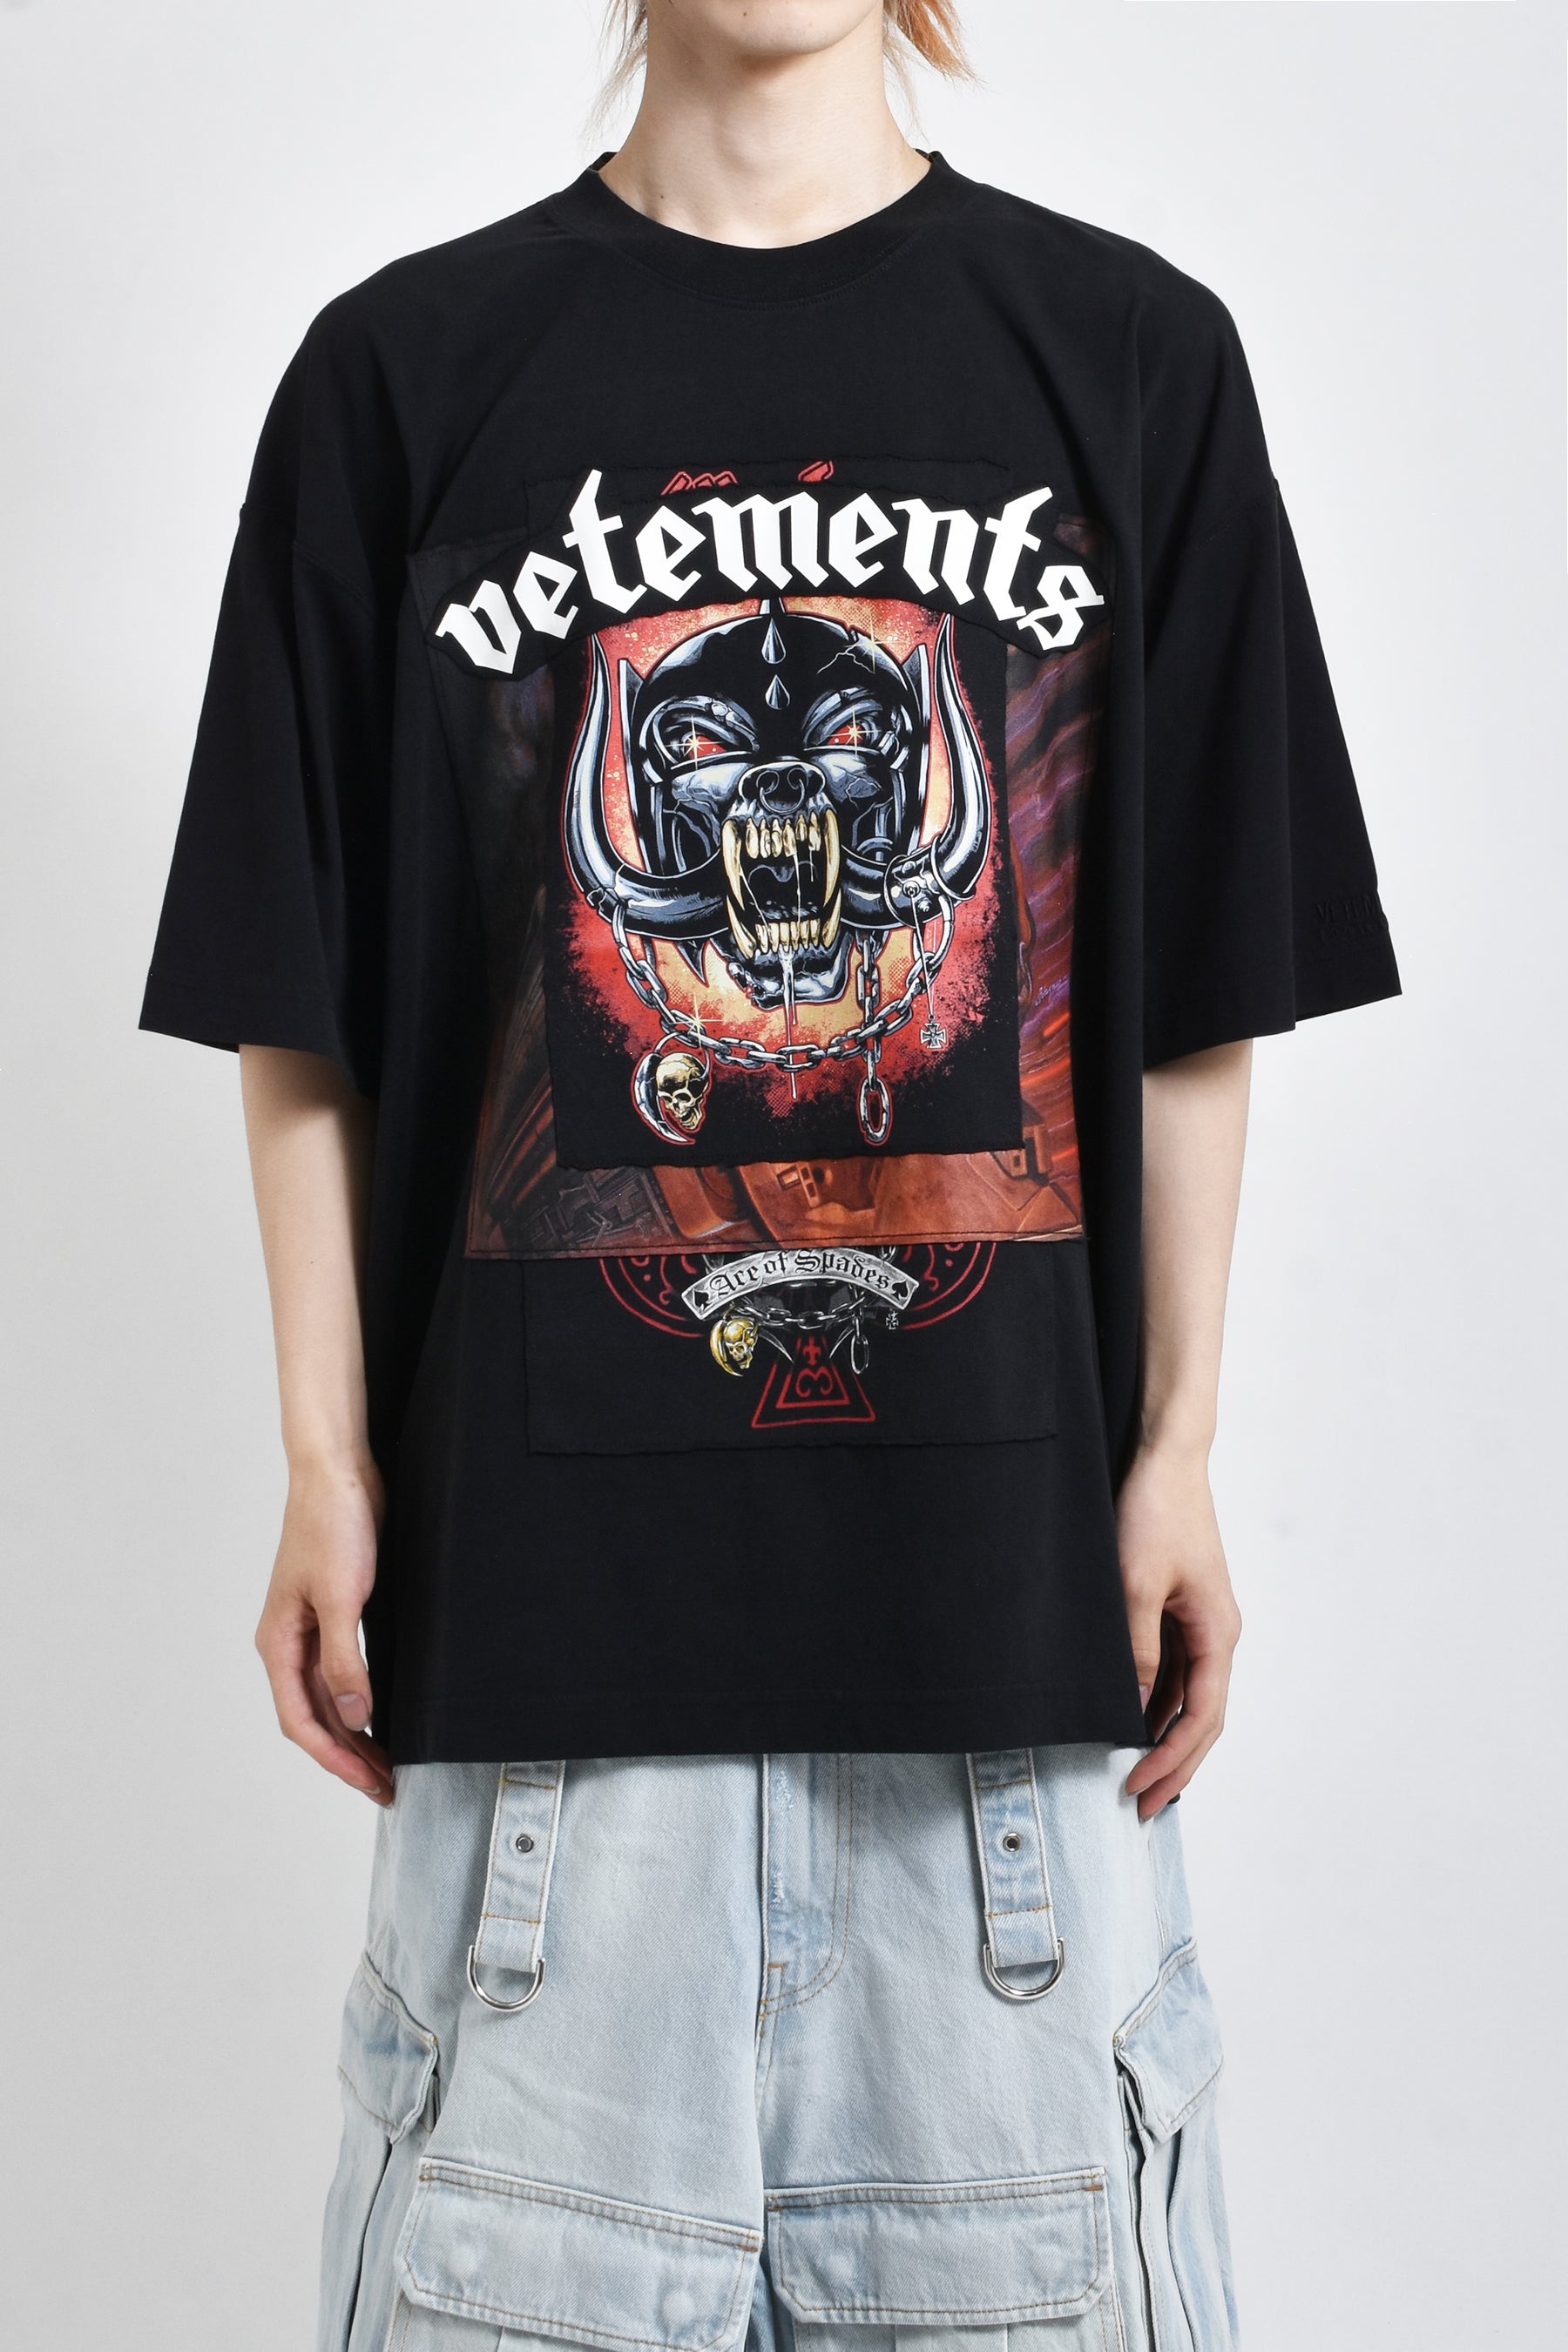 MOTORHEAD PATCHED T-SHIRT / BLK